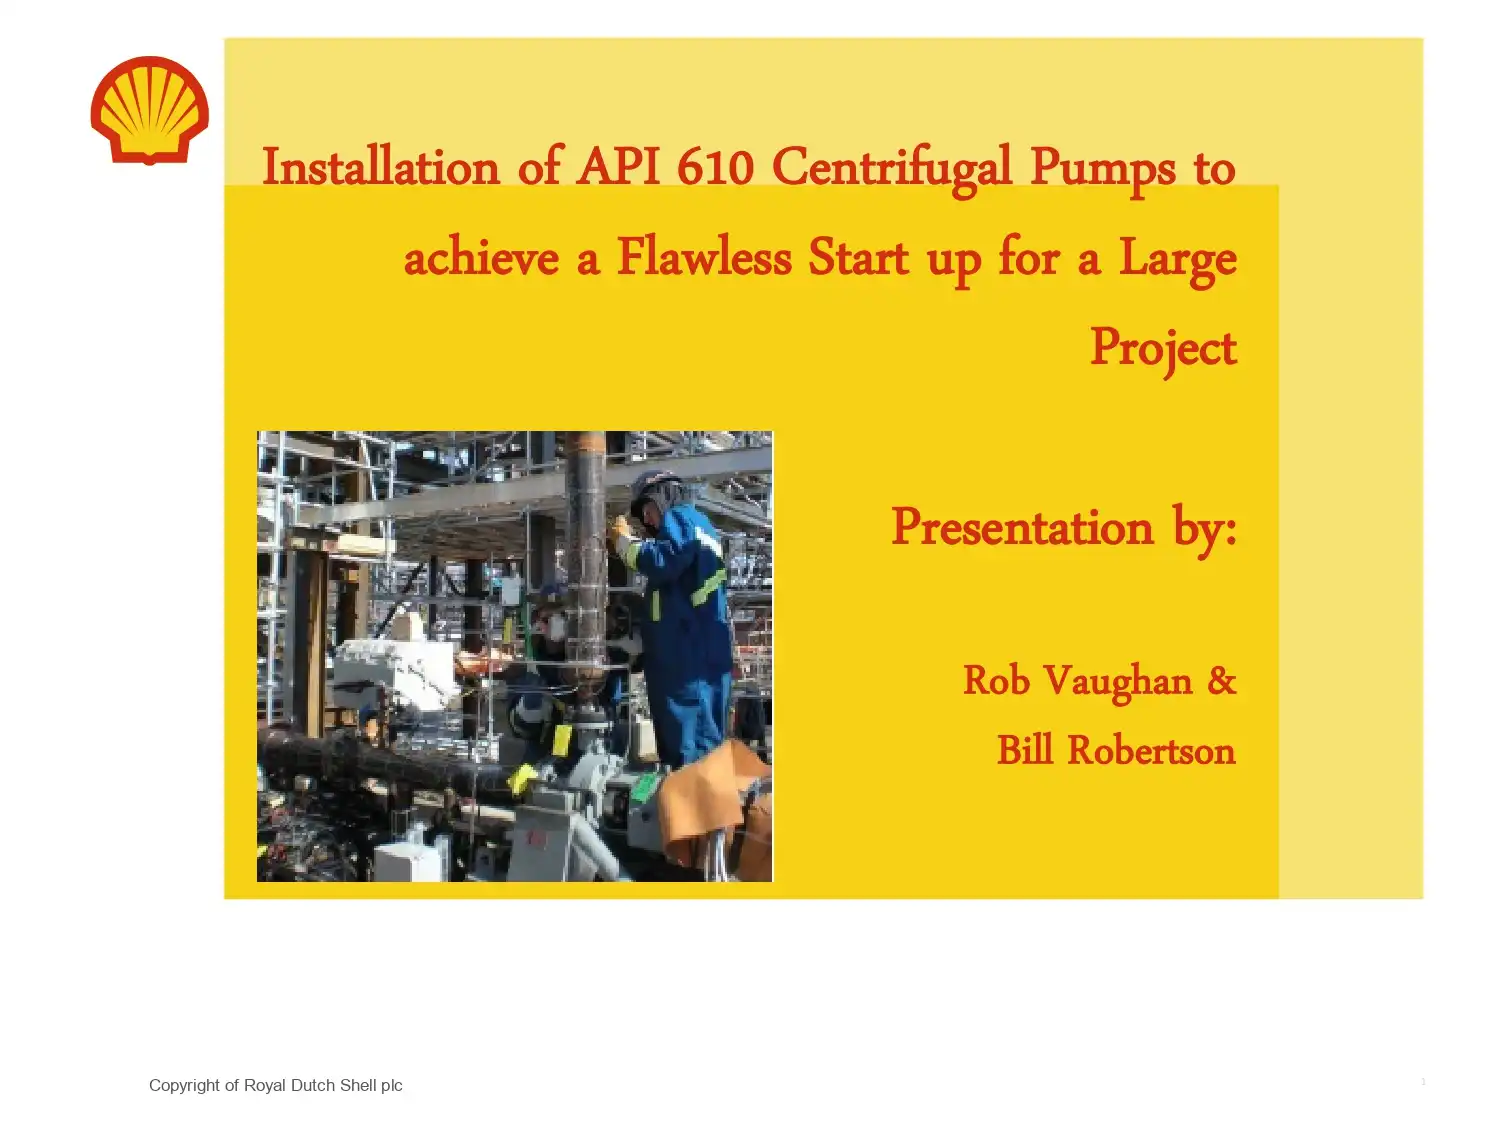 Installation of API 610 Centrifugal Pumps to achieve a Flawless Start up for a Large Project